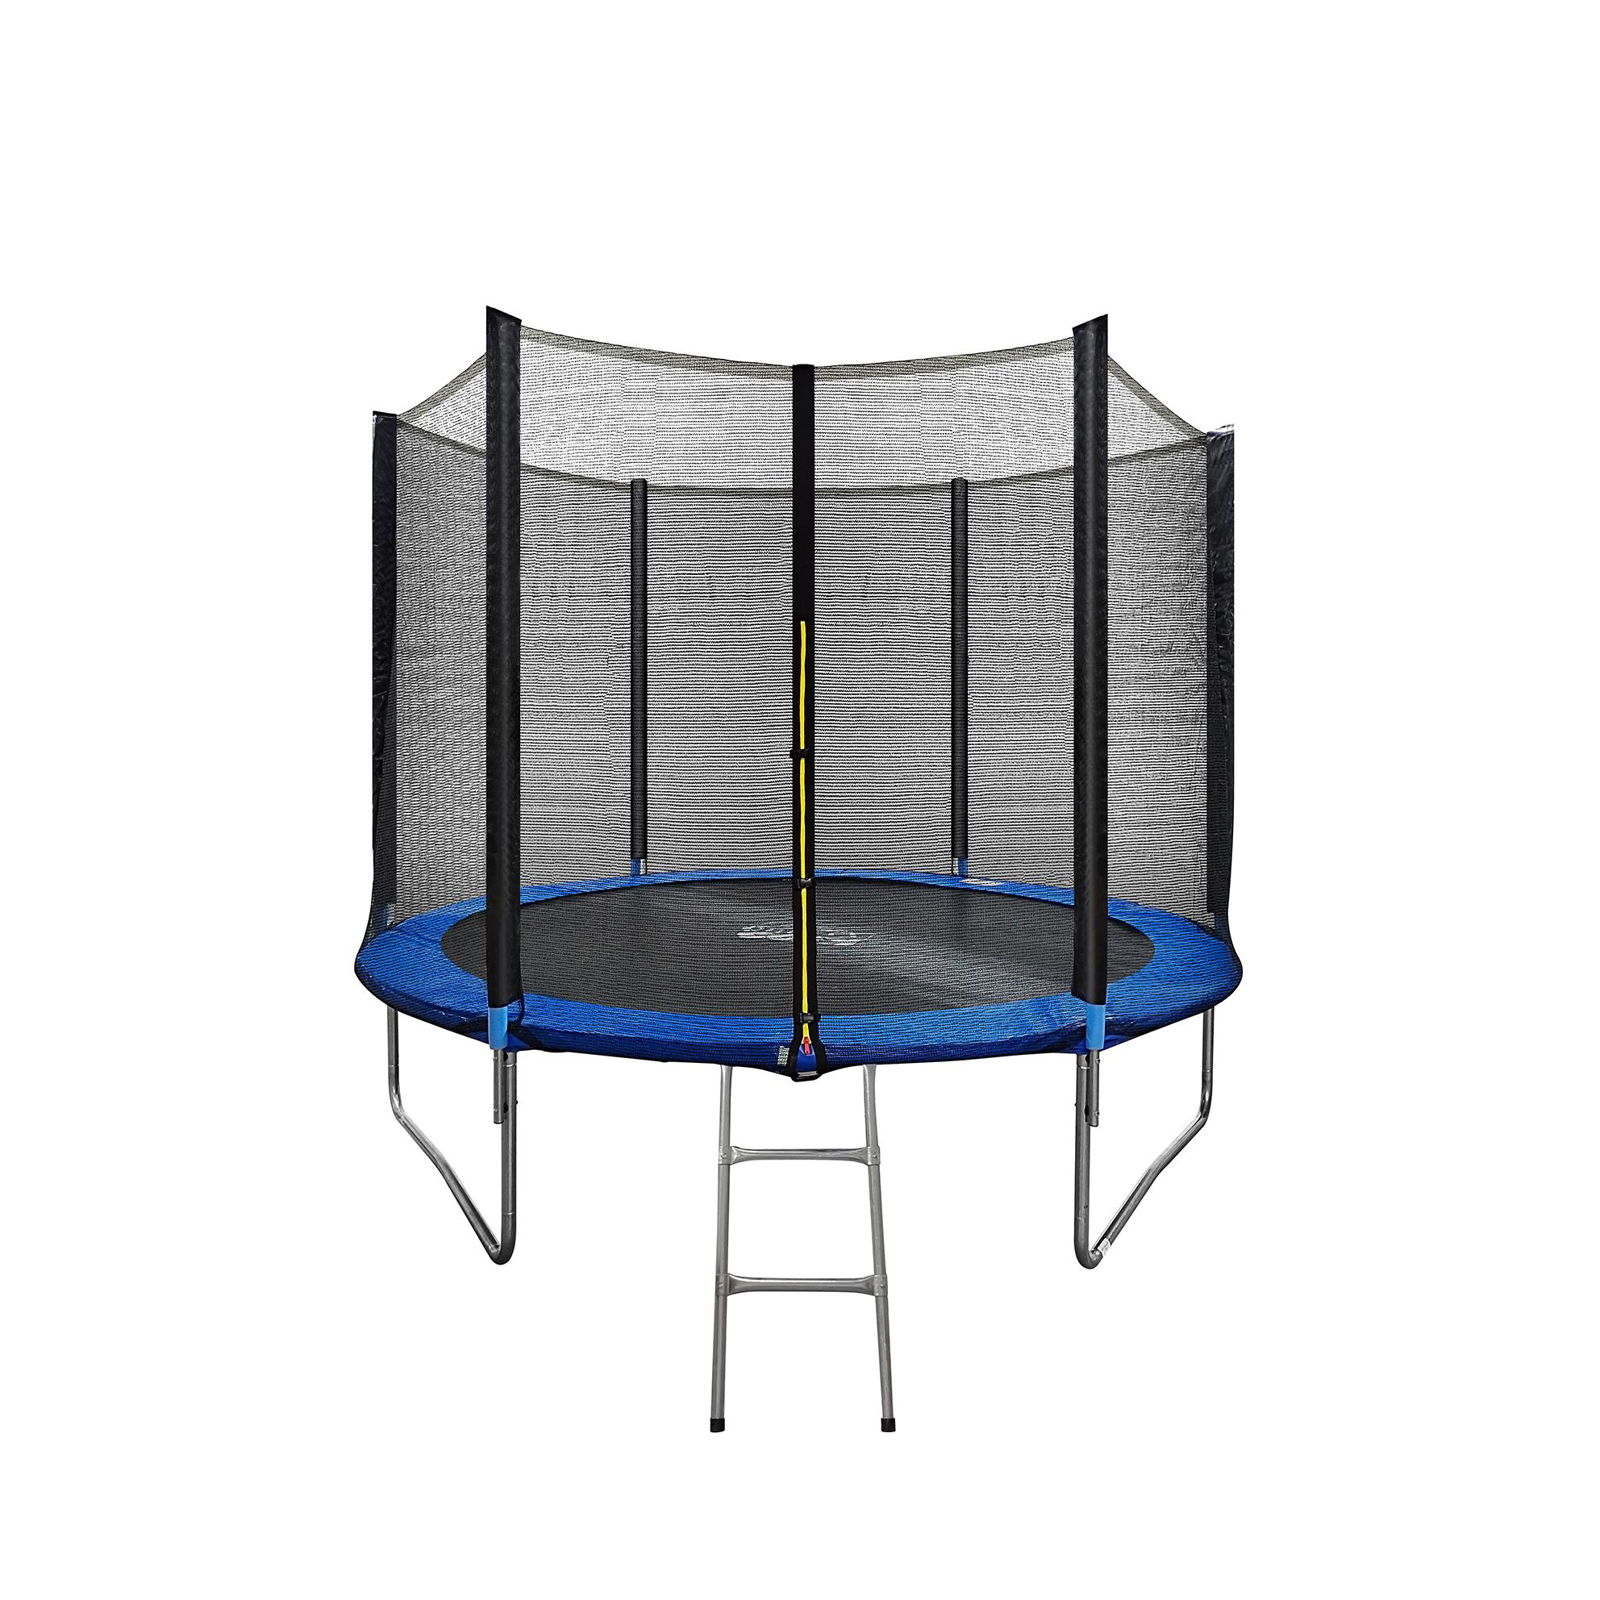 6ft 8ft 10ft 12ft 14ft 16ft Big Outdoor Jumping Bed Trampoline  With Safety Net  3